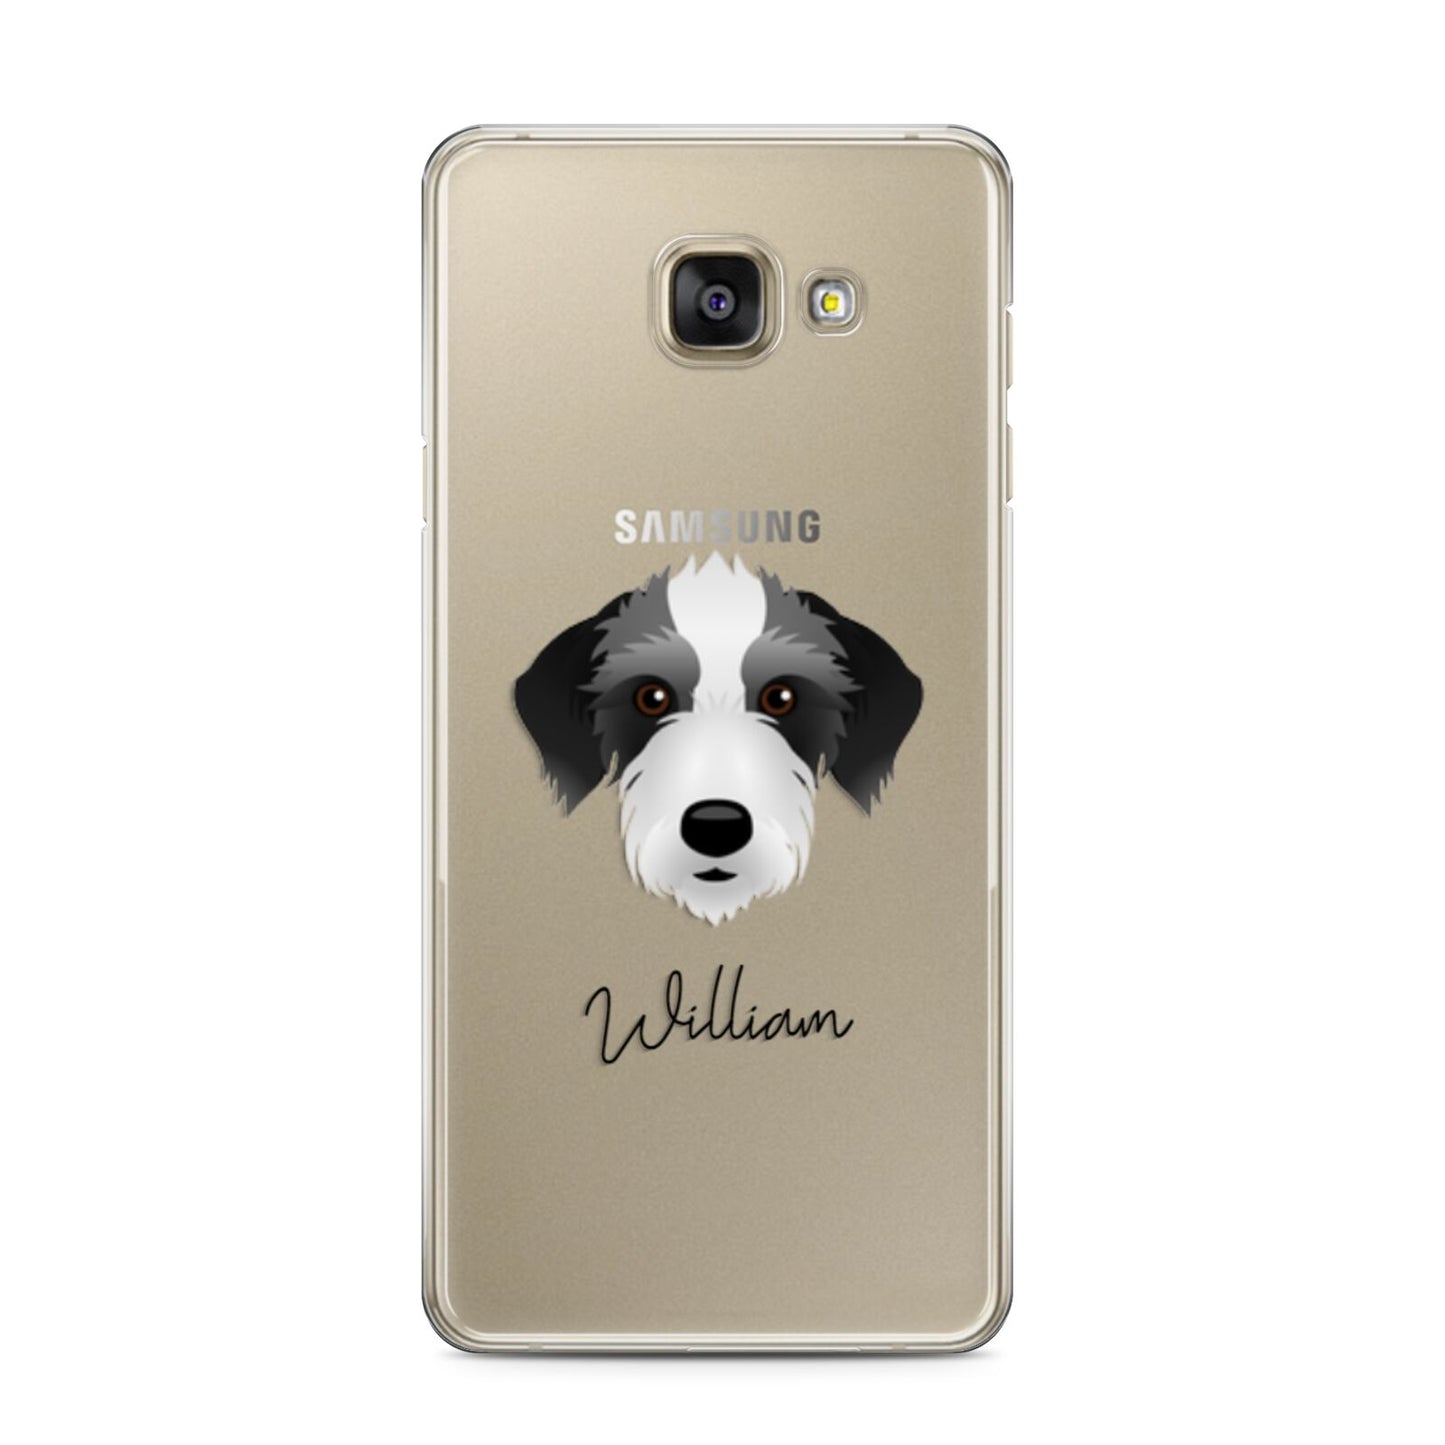 Bedlington Whippet Personalised Samsung Galaxy A3 2016 Case on gold phone